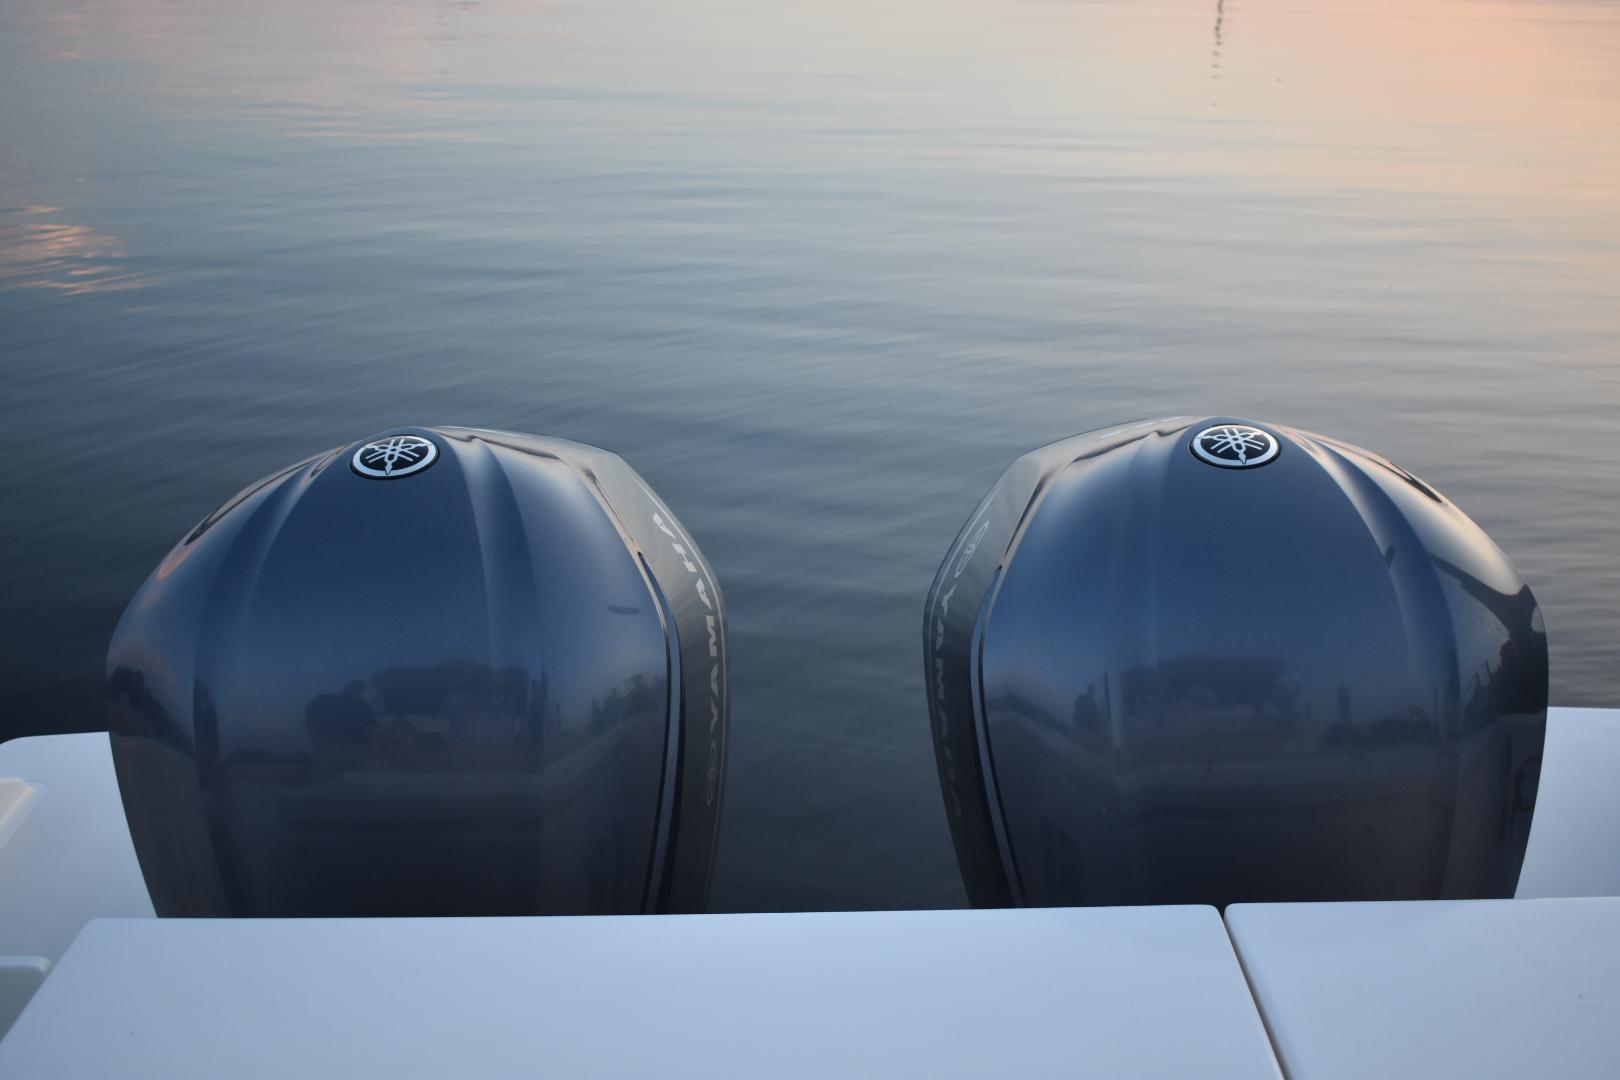 Pursuit 32 Mental Floss - Outboard engines on water